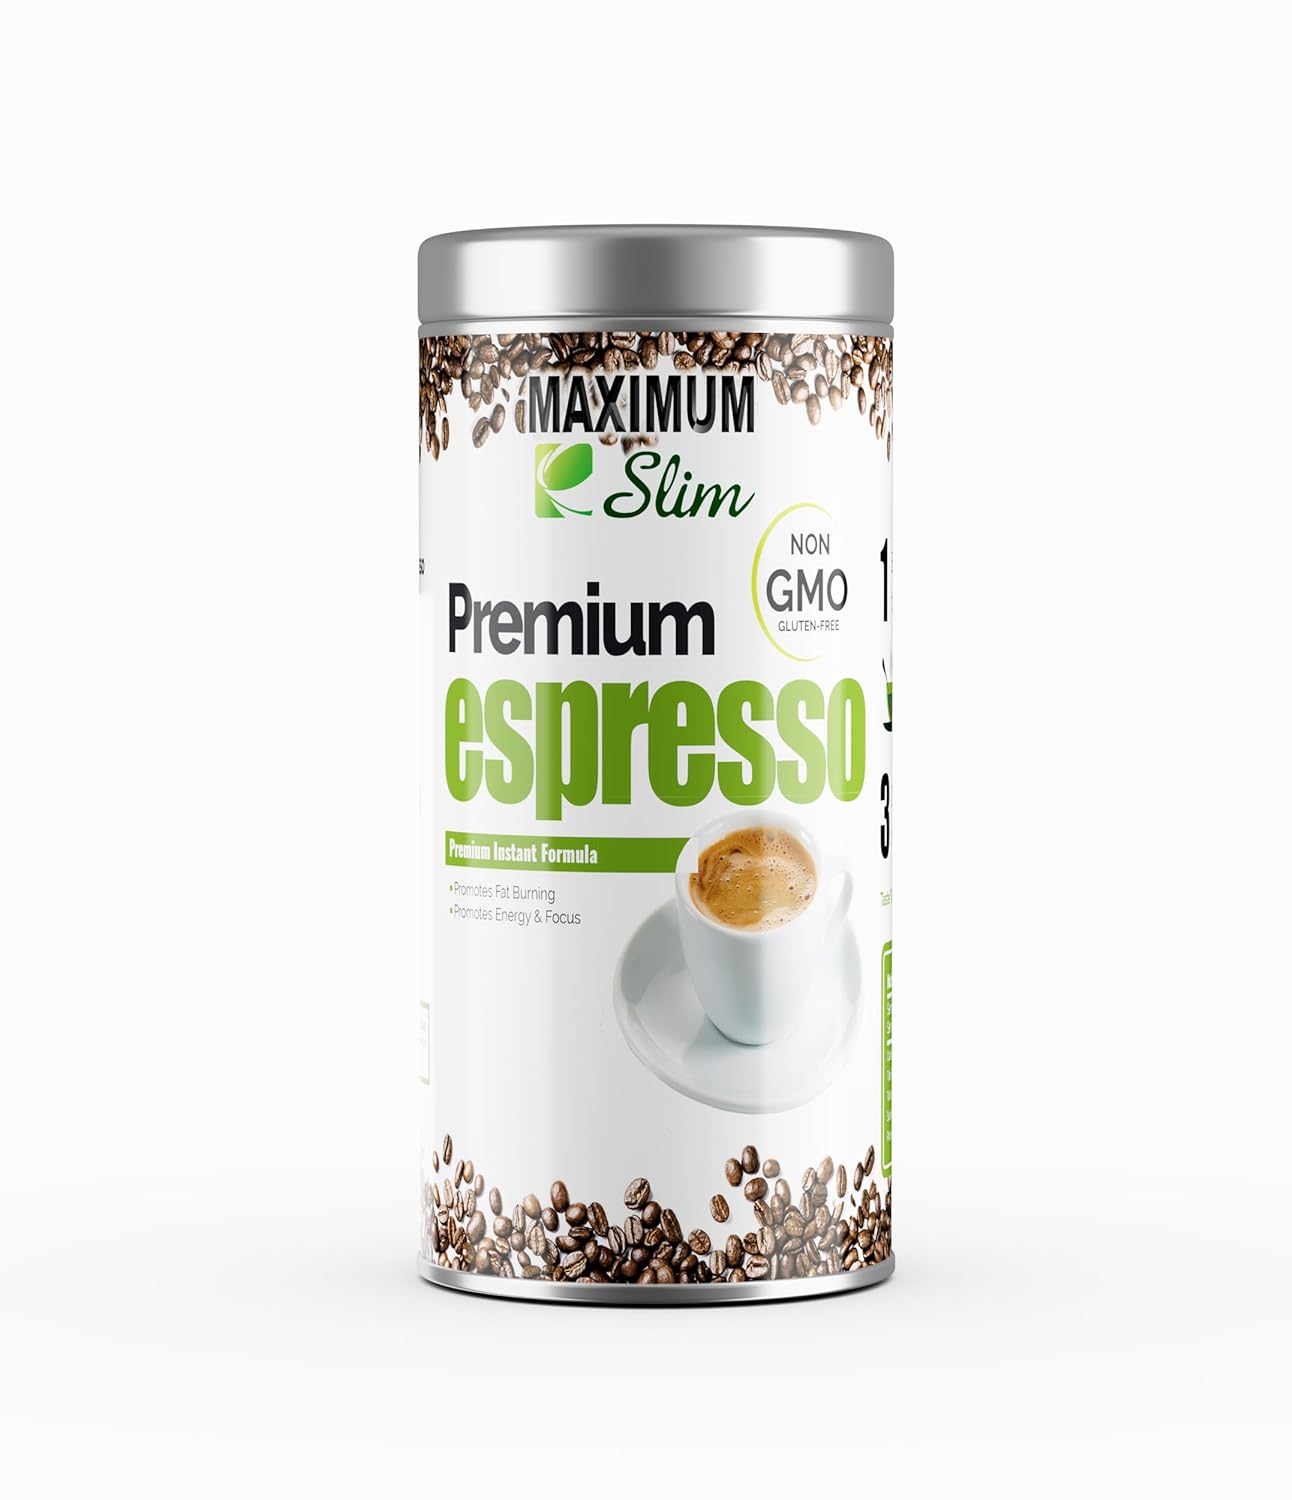 Gourmet ESPRESSO: - 100% Arabica Coffee, Stimulates KETOSIS, Boosts your ENERGY & FOCUS. - Medium Dark Roast, Instant Coffee Formulated with Essential Vitamins and Natural Herbal Extracts.